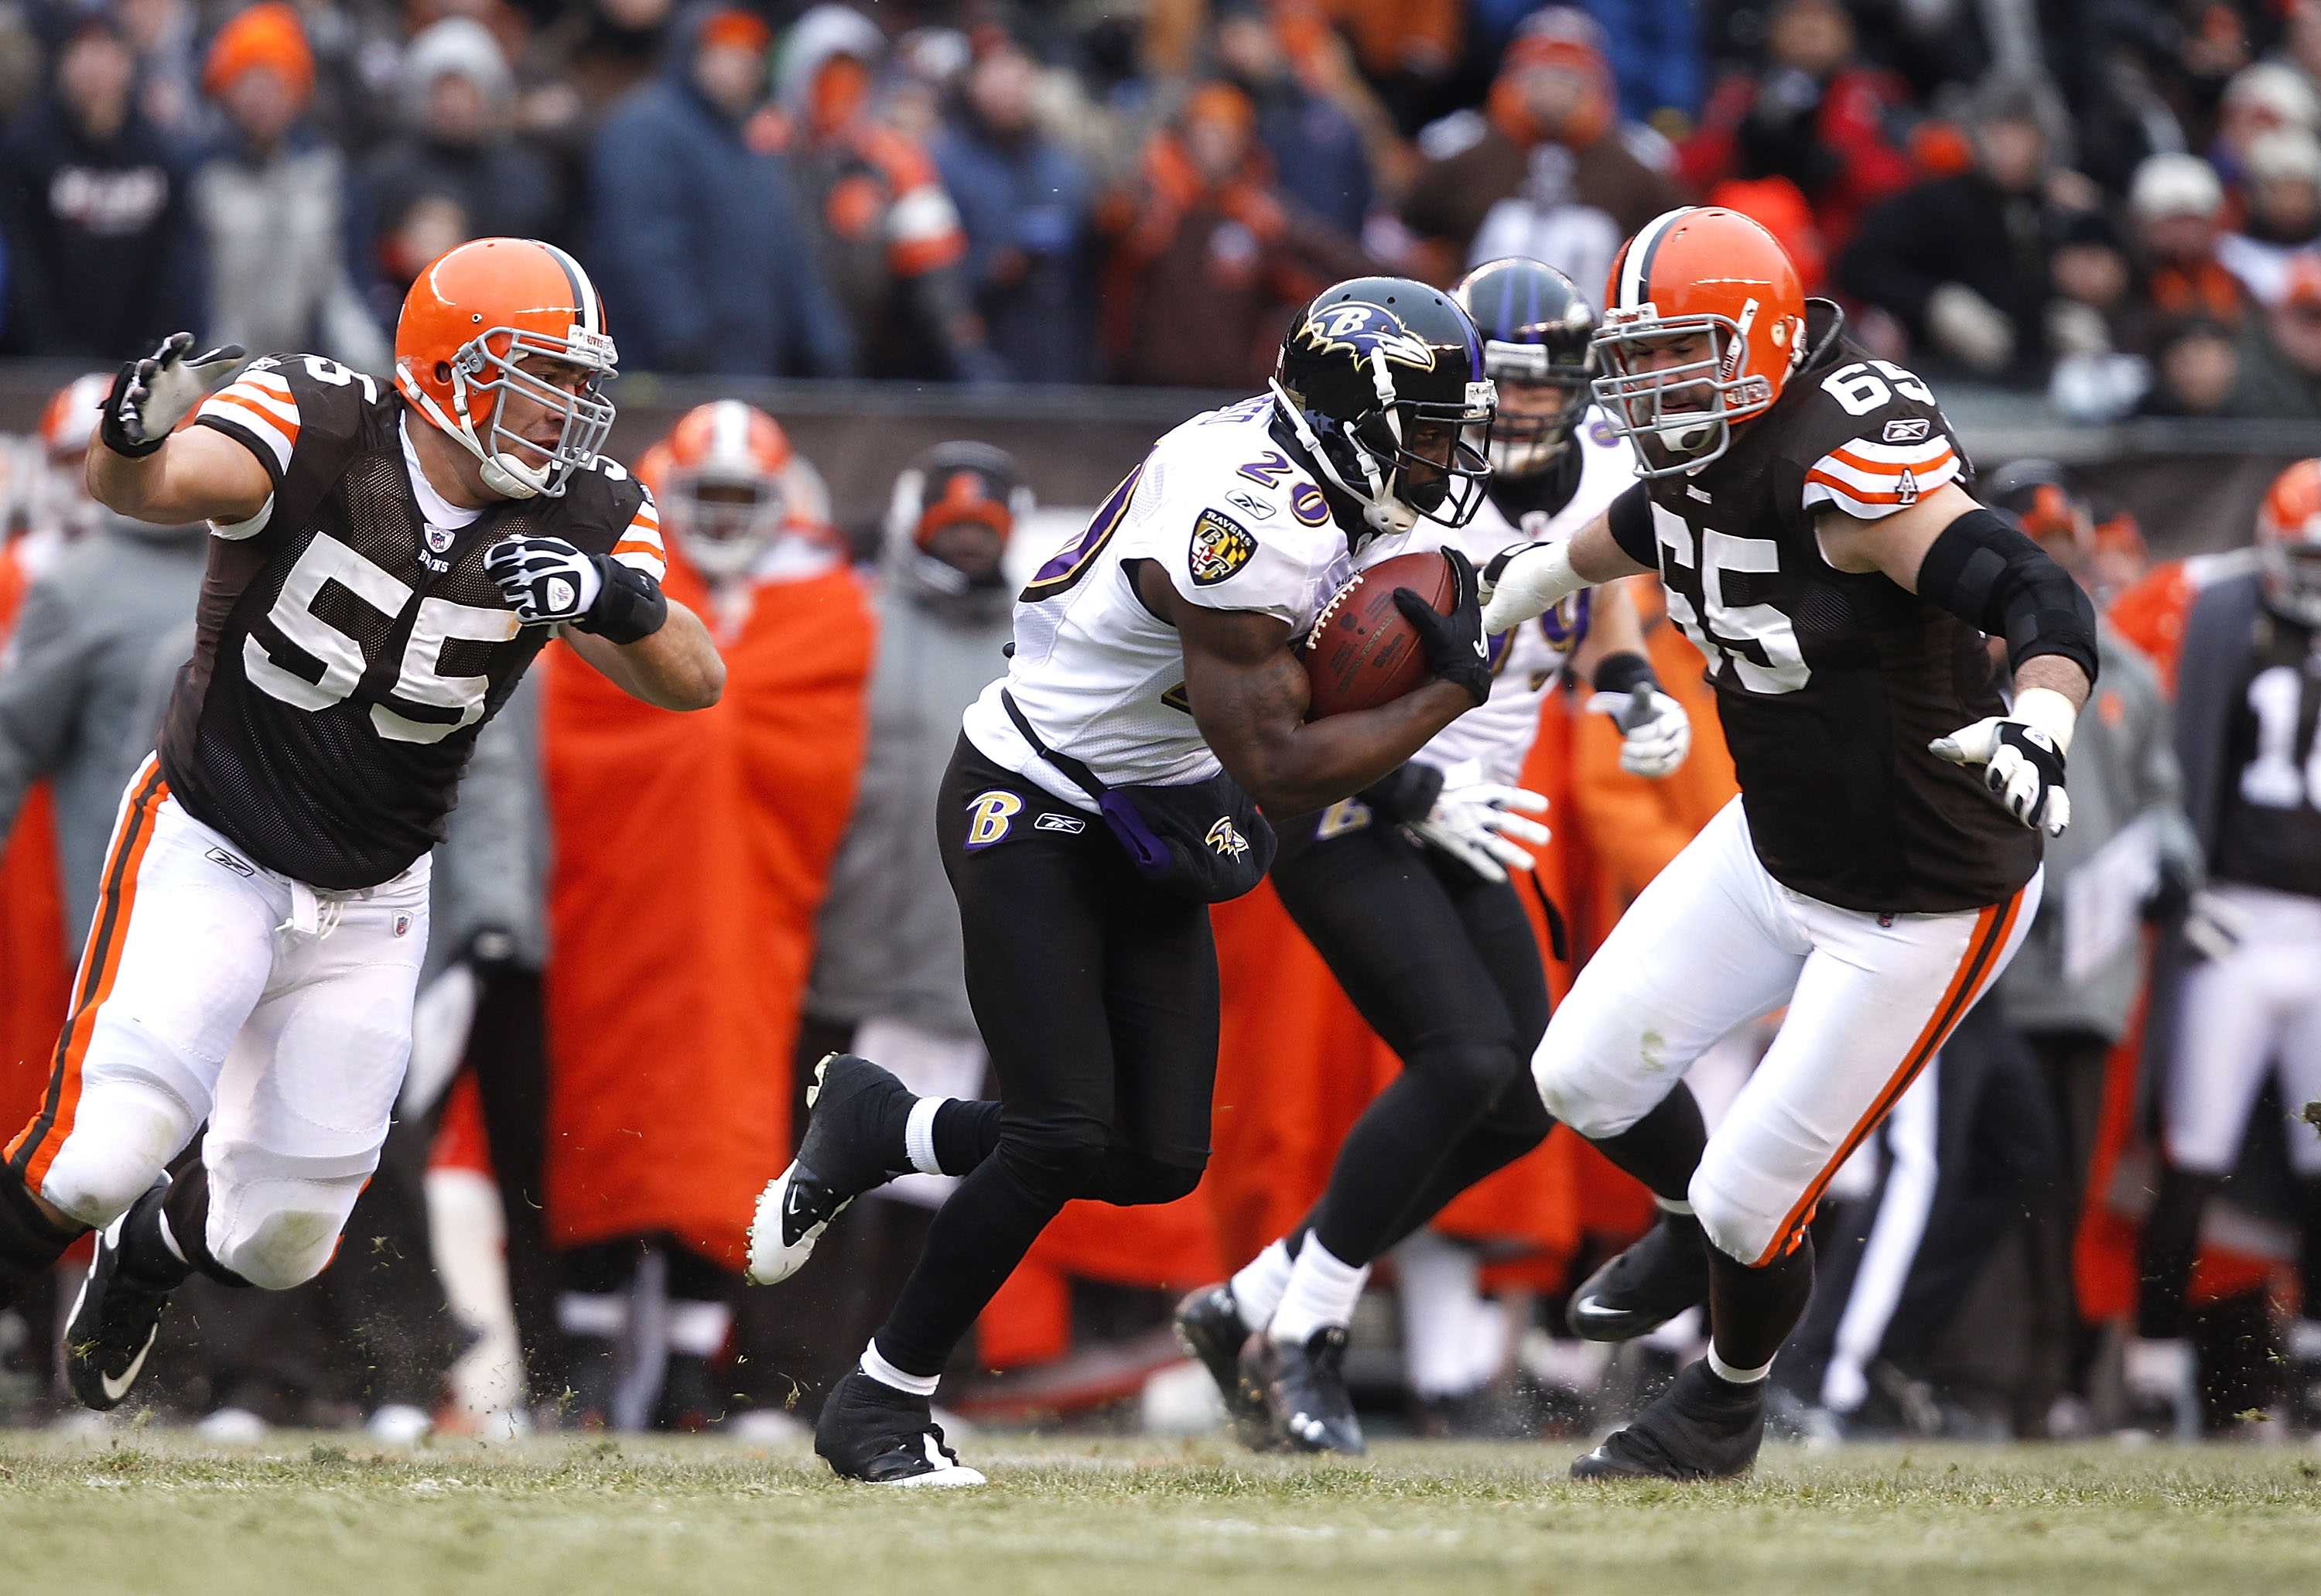 CLEVELAND - DECEMBER 26:  Safety Ed Reed #20 of the Baltimore Ravens returns an interception as he is chased by defenders Alex Mack #55 and Eric Steinbach #65 of the Cleveland Browns at Cleveland Browns Stadium on December 26, 2010 in Cleveland, Ohio.  (P